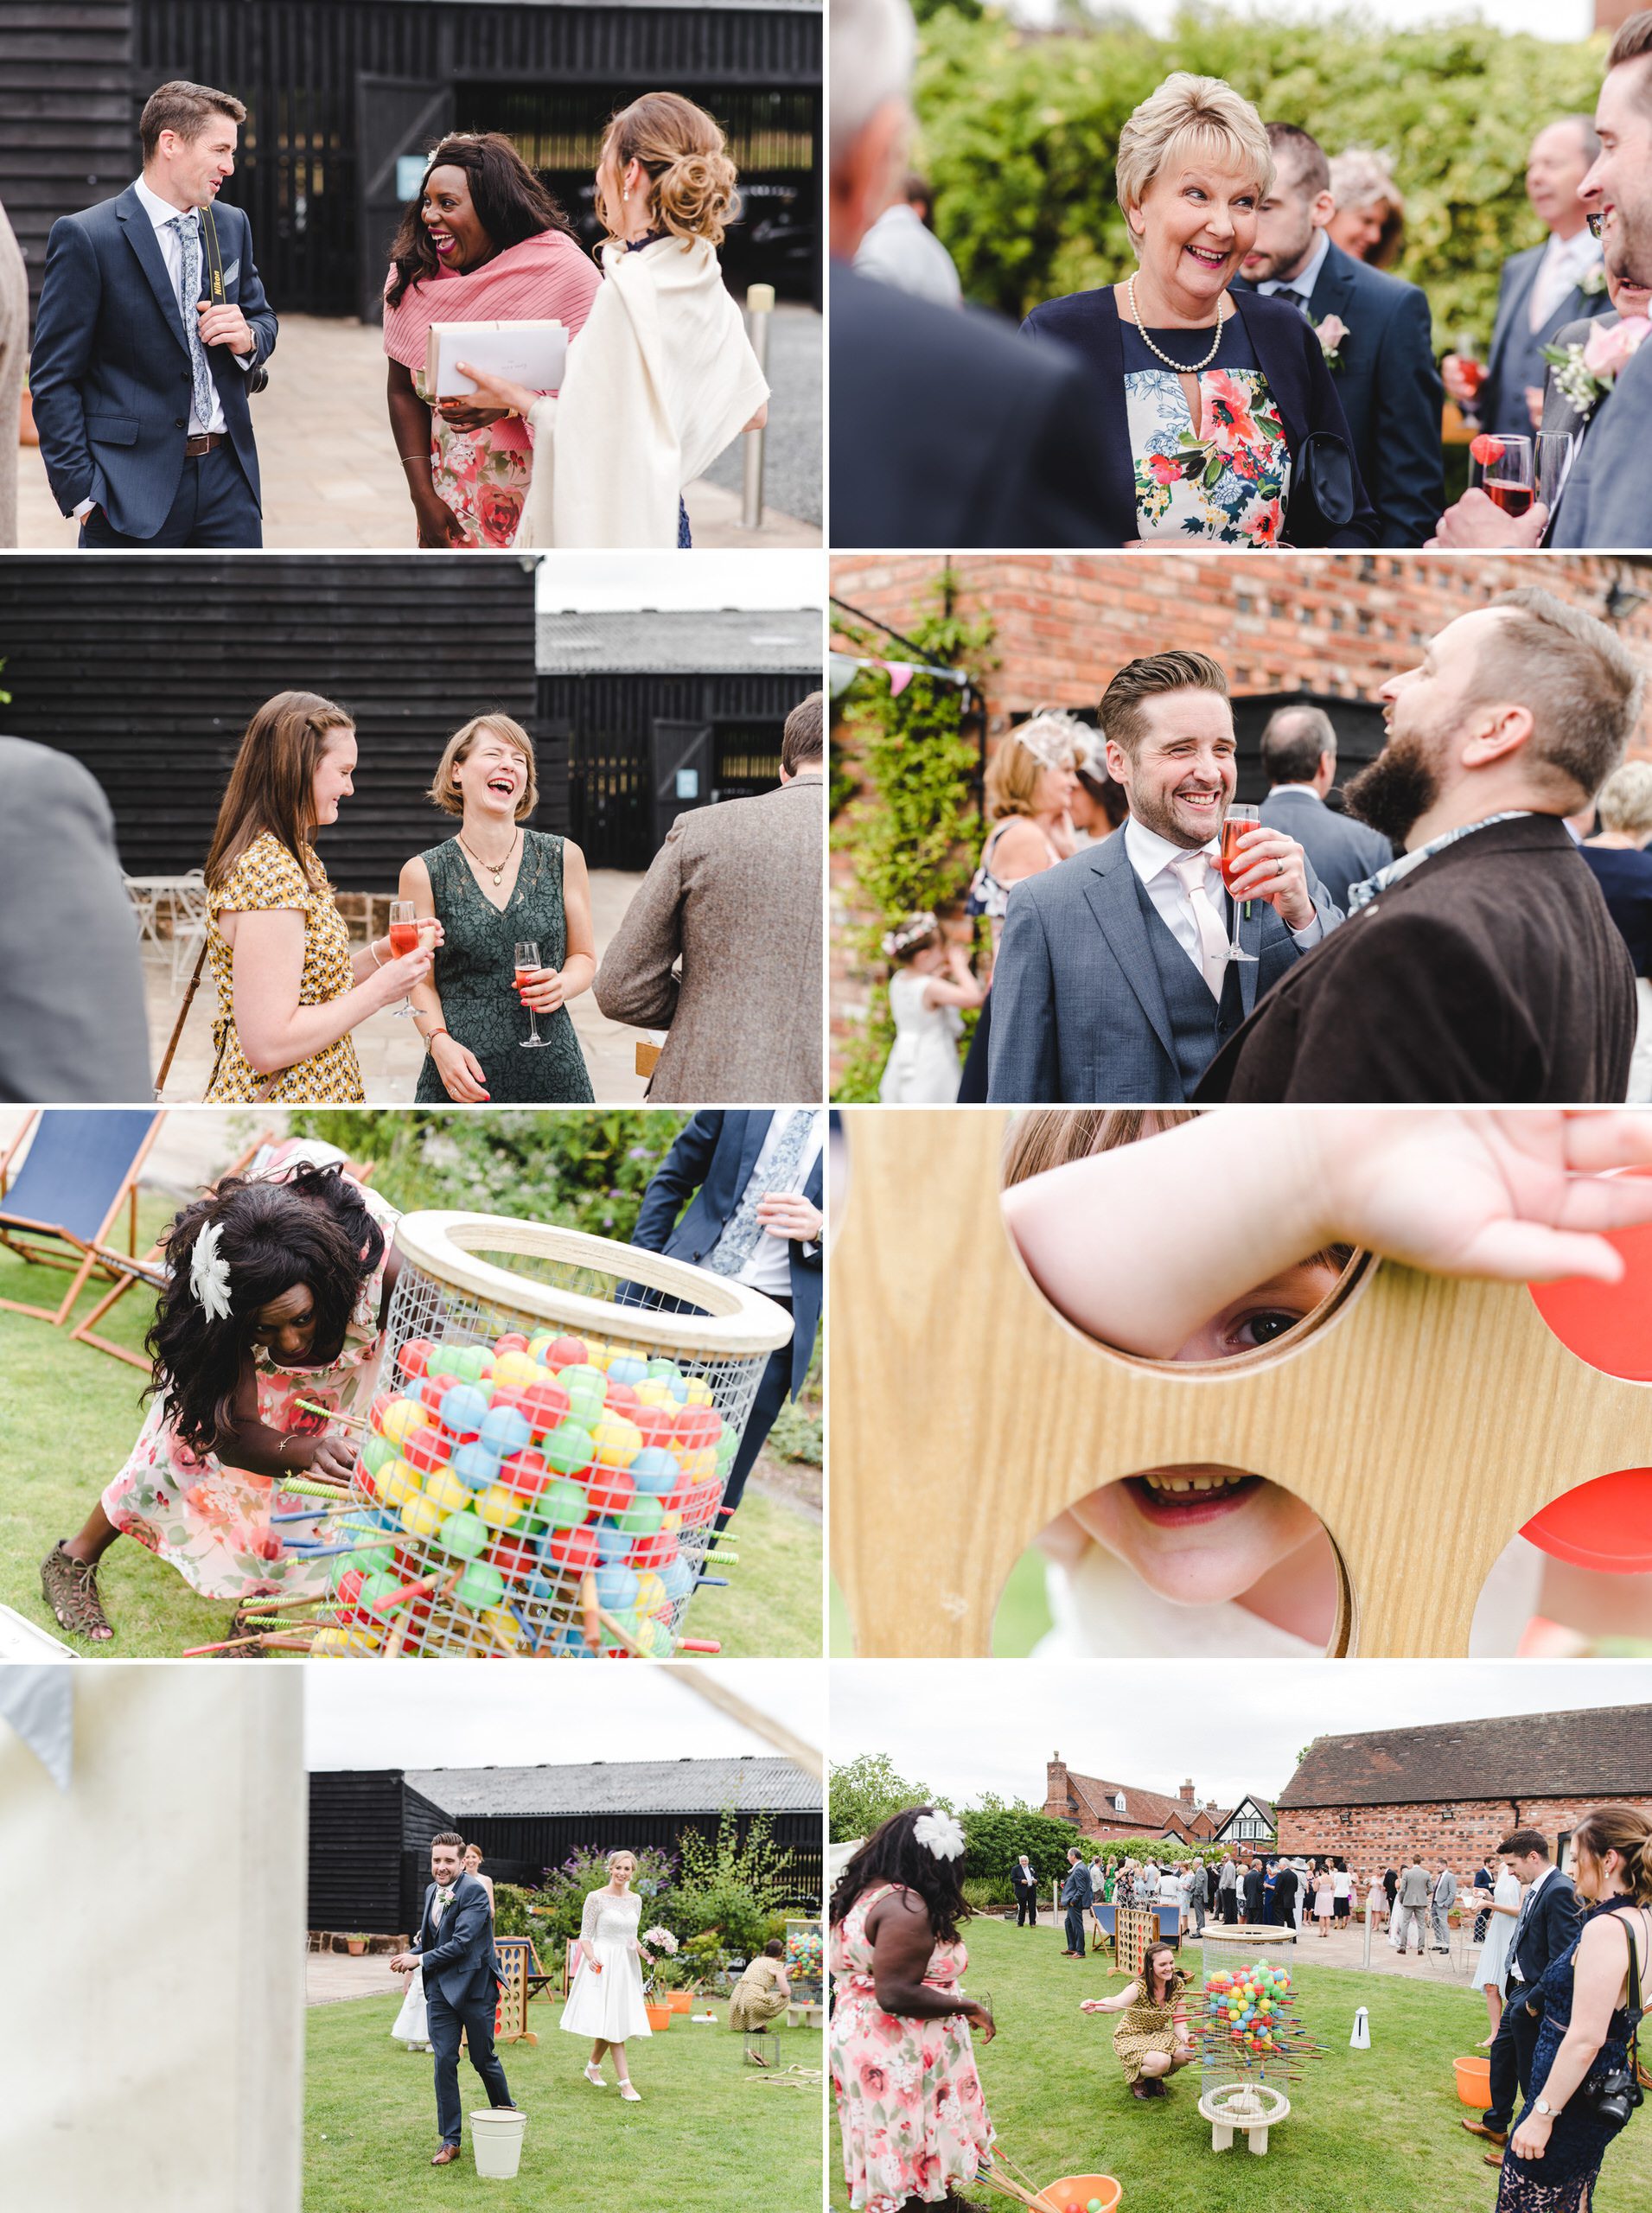 Curradine barns drinks reception and garden games on the lawn